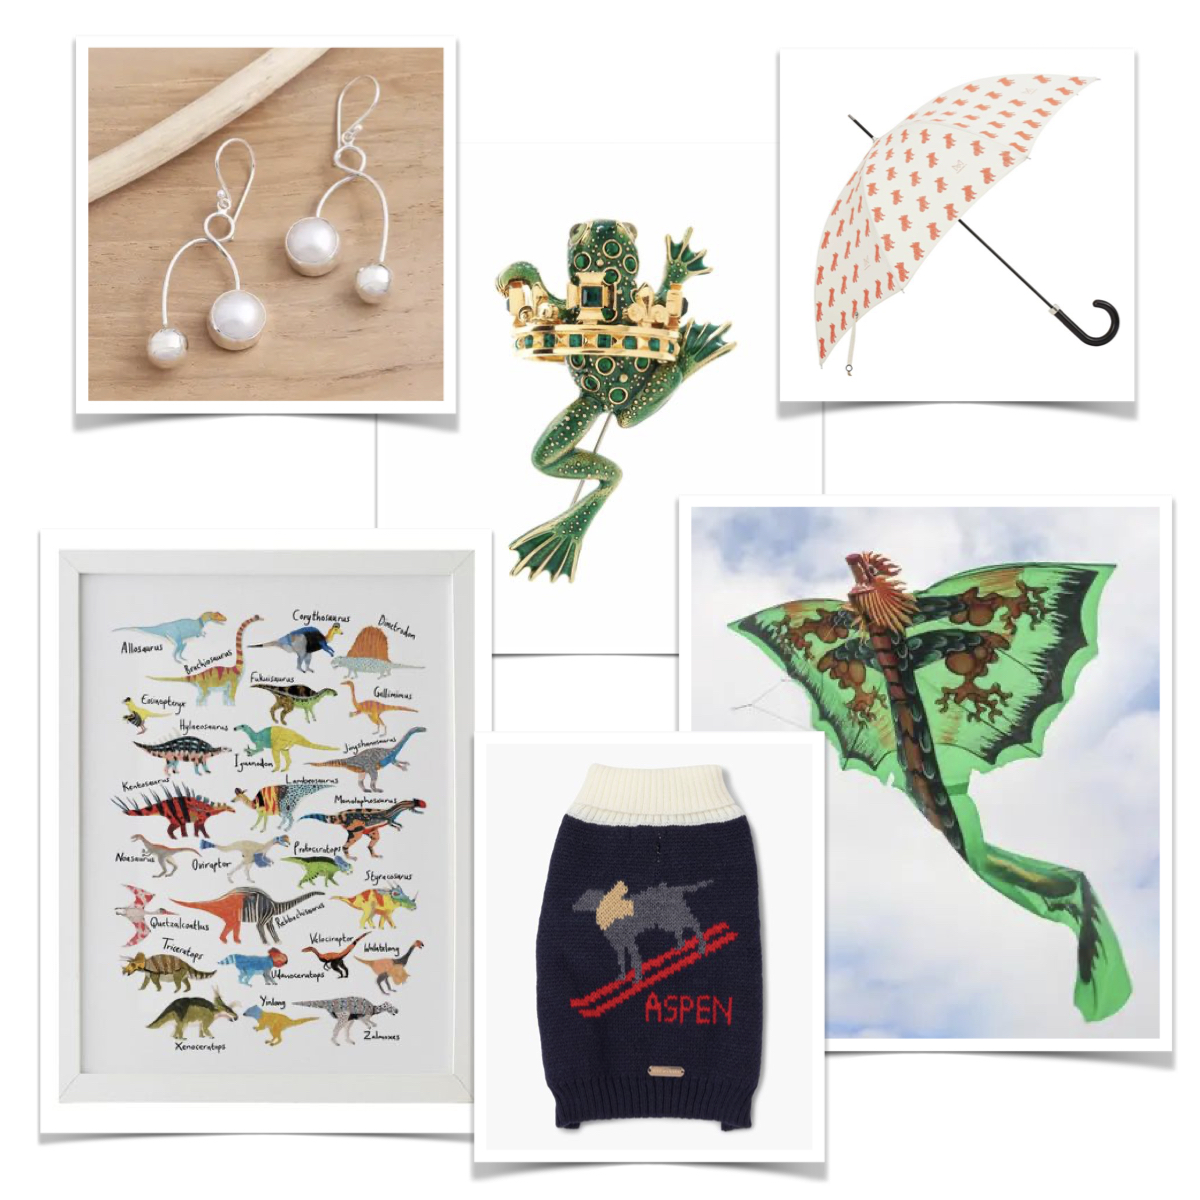 Gift ideas from off the beaten path…